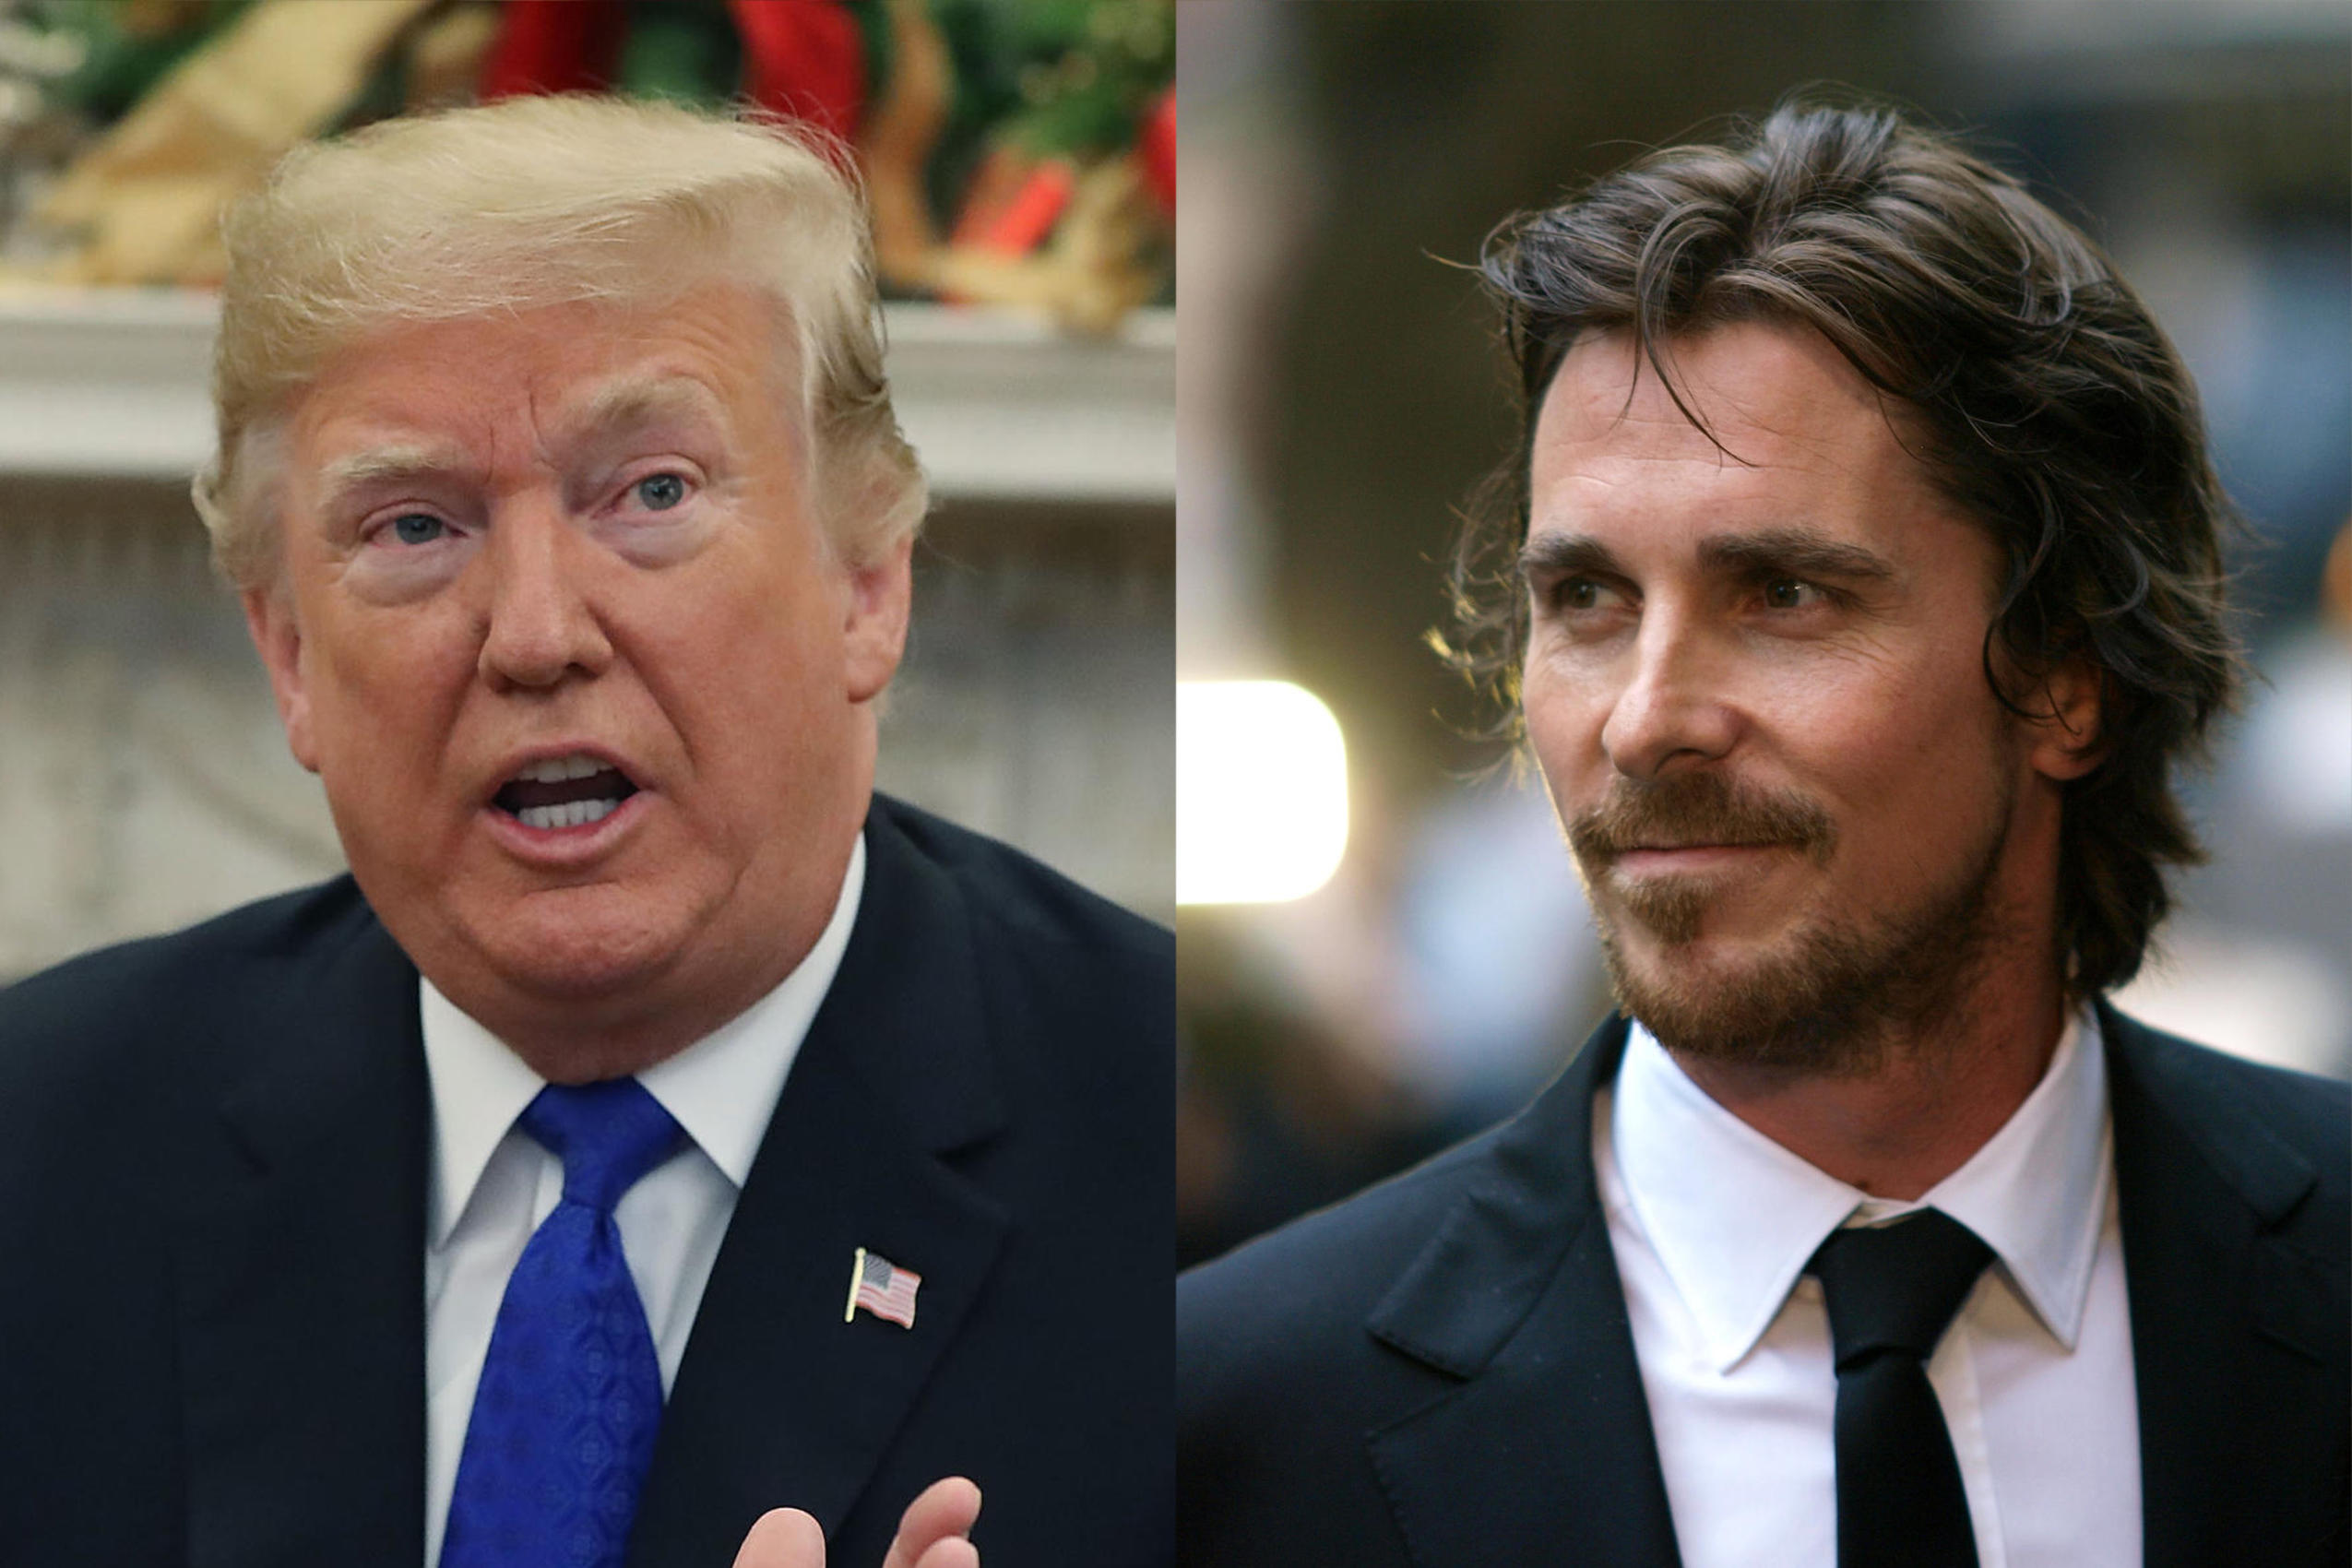 Christian Bale says Trump thought he was actually Bruce Wayne when they met  - CBS News